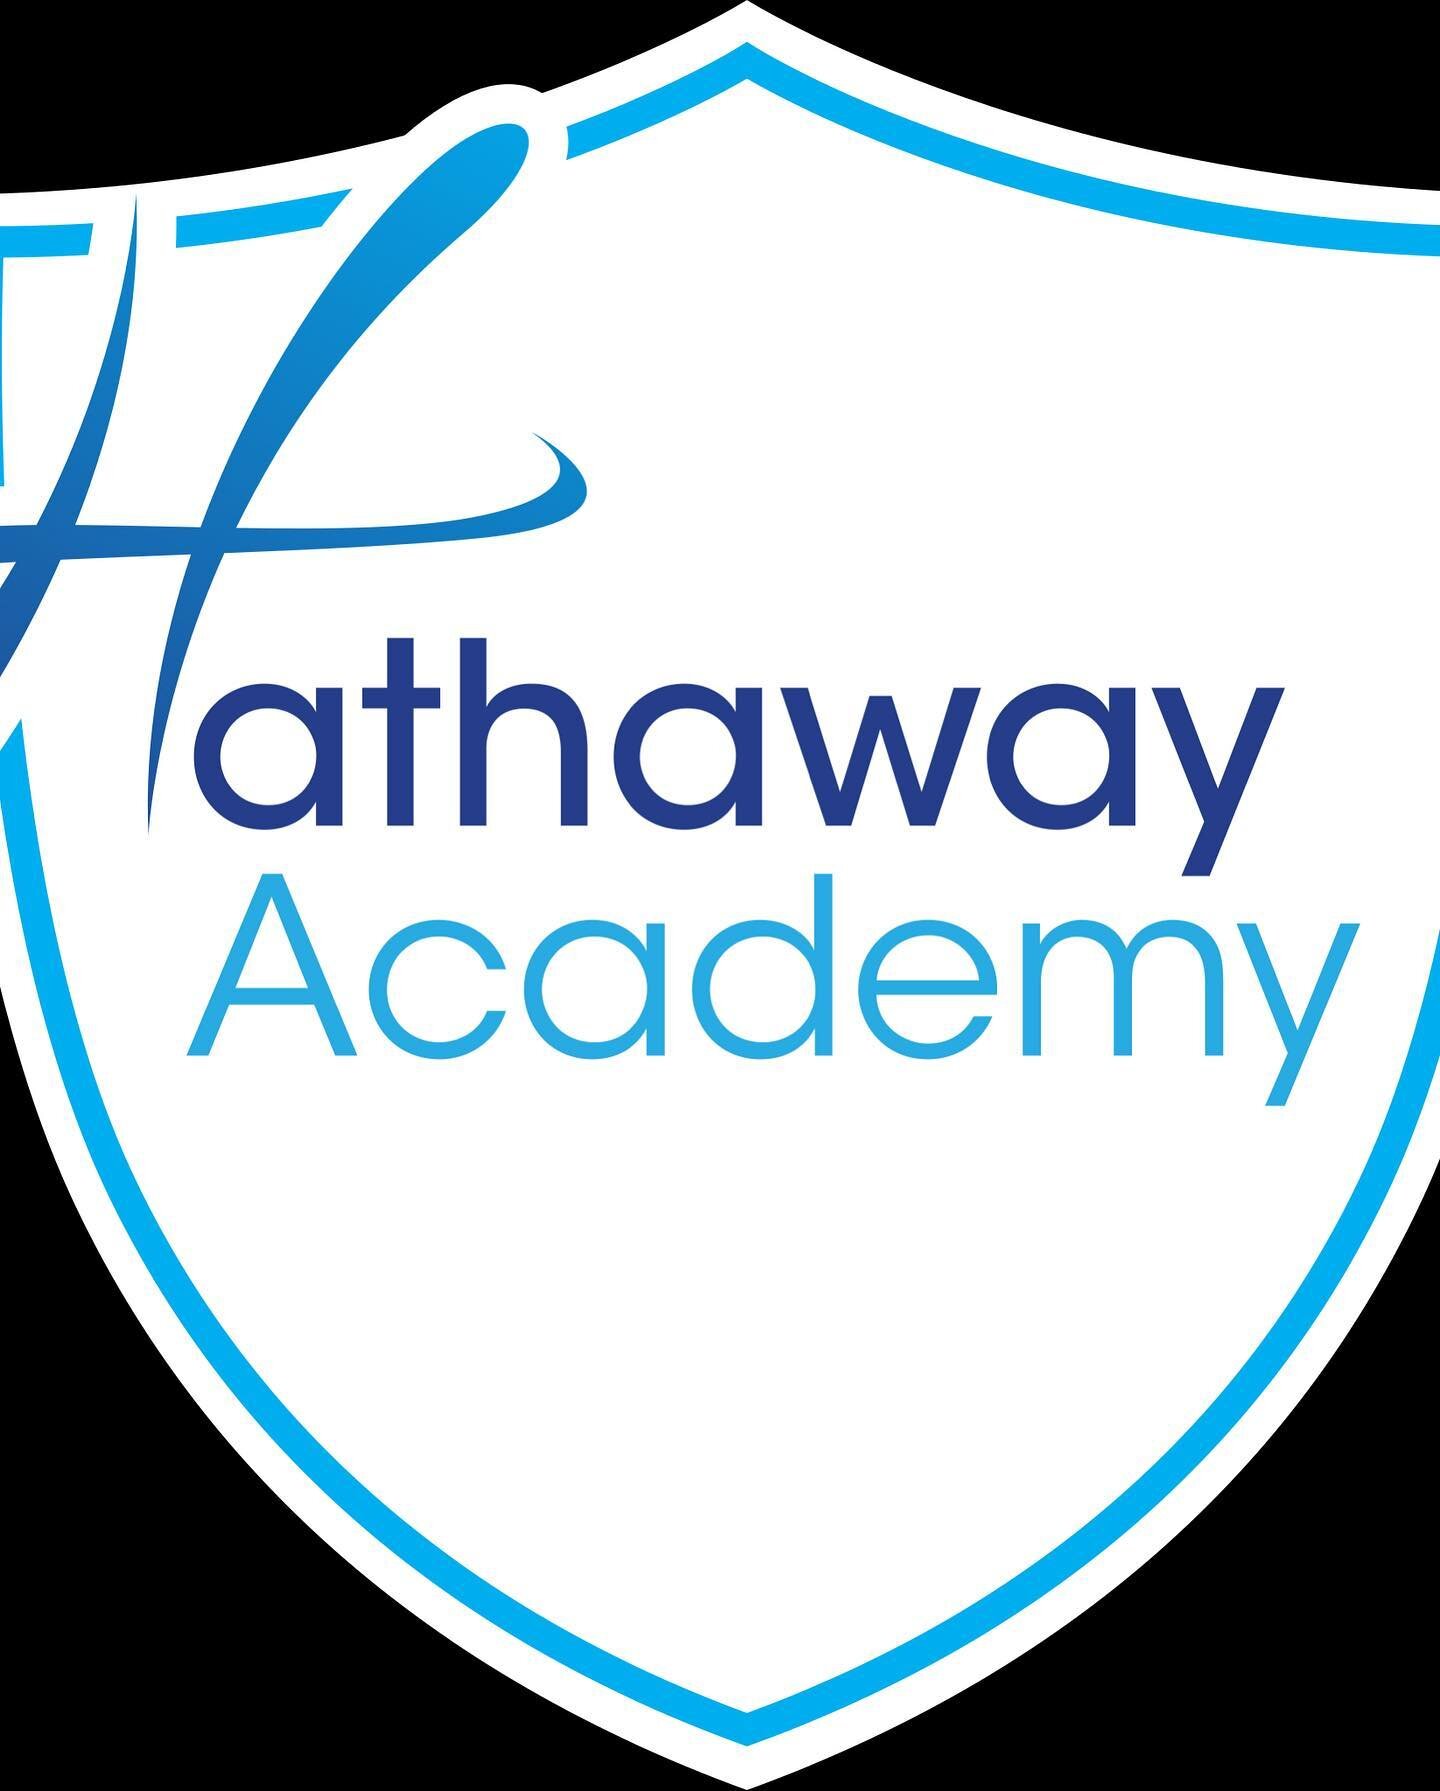 We were given a fantastic opportunity this week by Hathaway Academy to come in and share with their students what community support is available in the borough to those who are in need. The school prides themselves in being facilitators of learning b